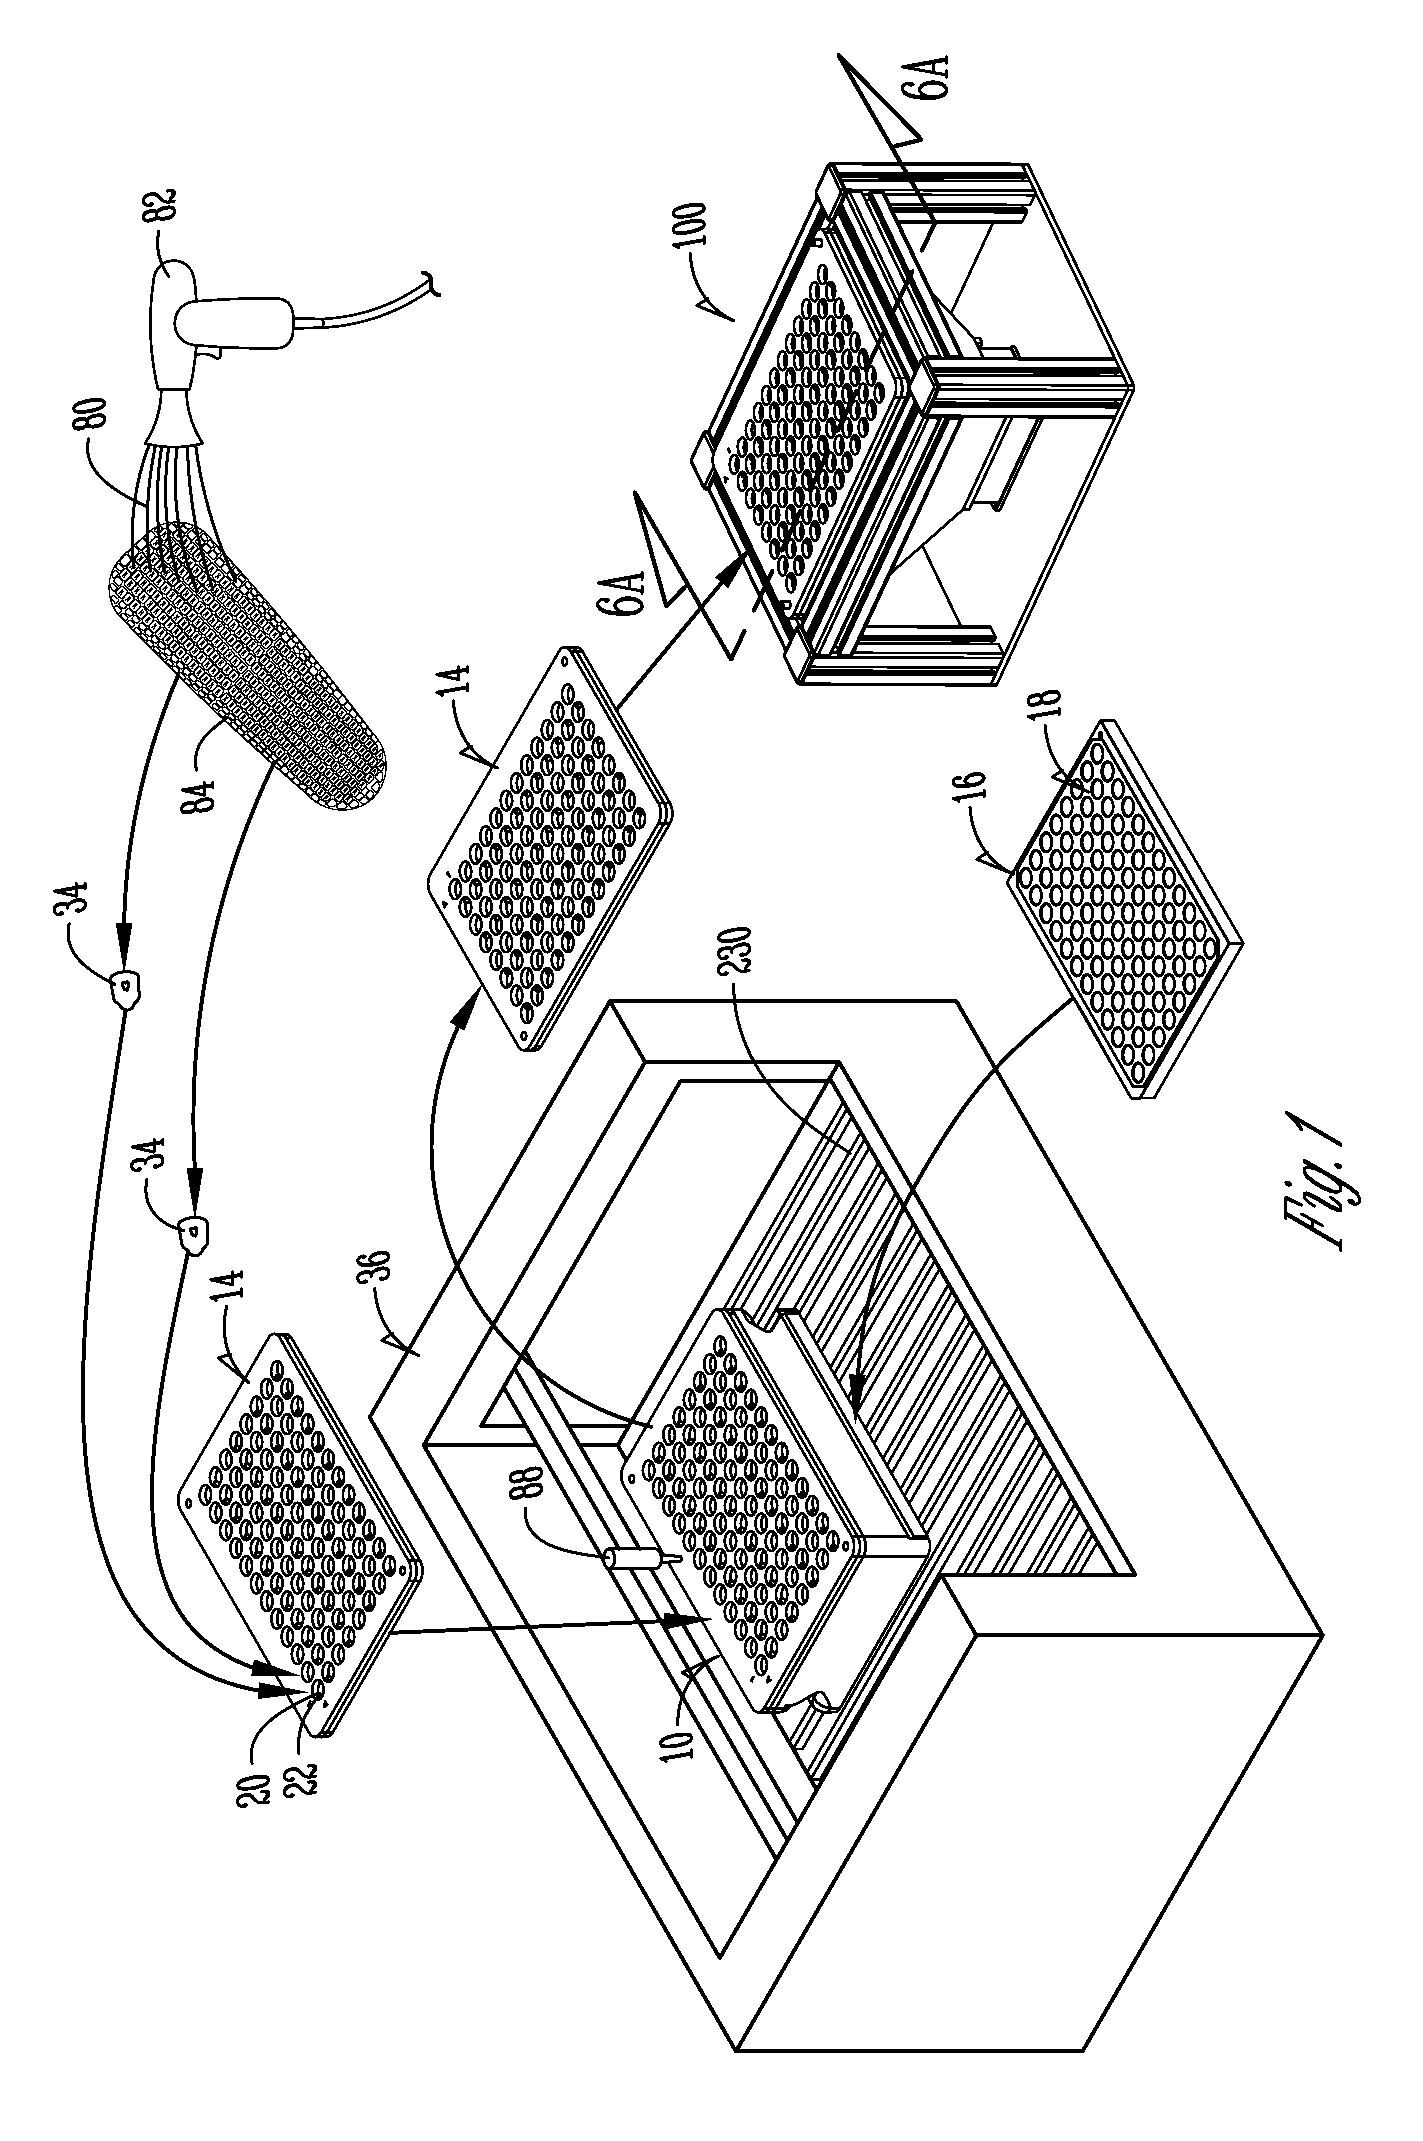 Apparatus, method and system for creating, handling, collecting and indexing seed and seed portions from plant seed